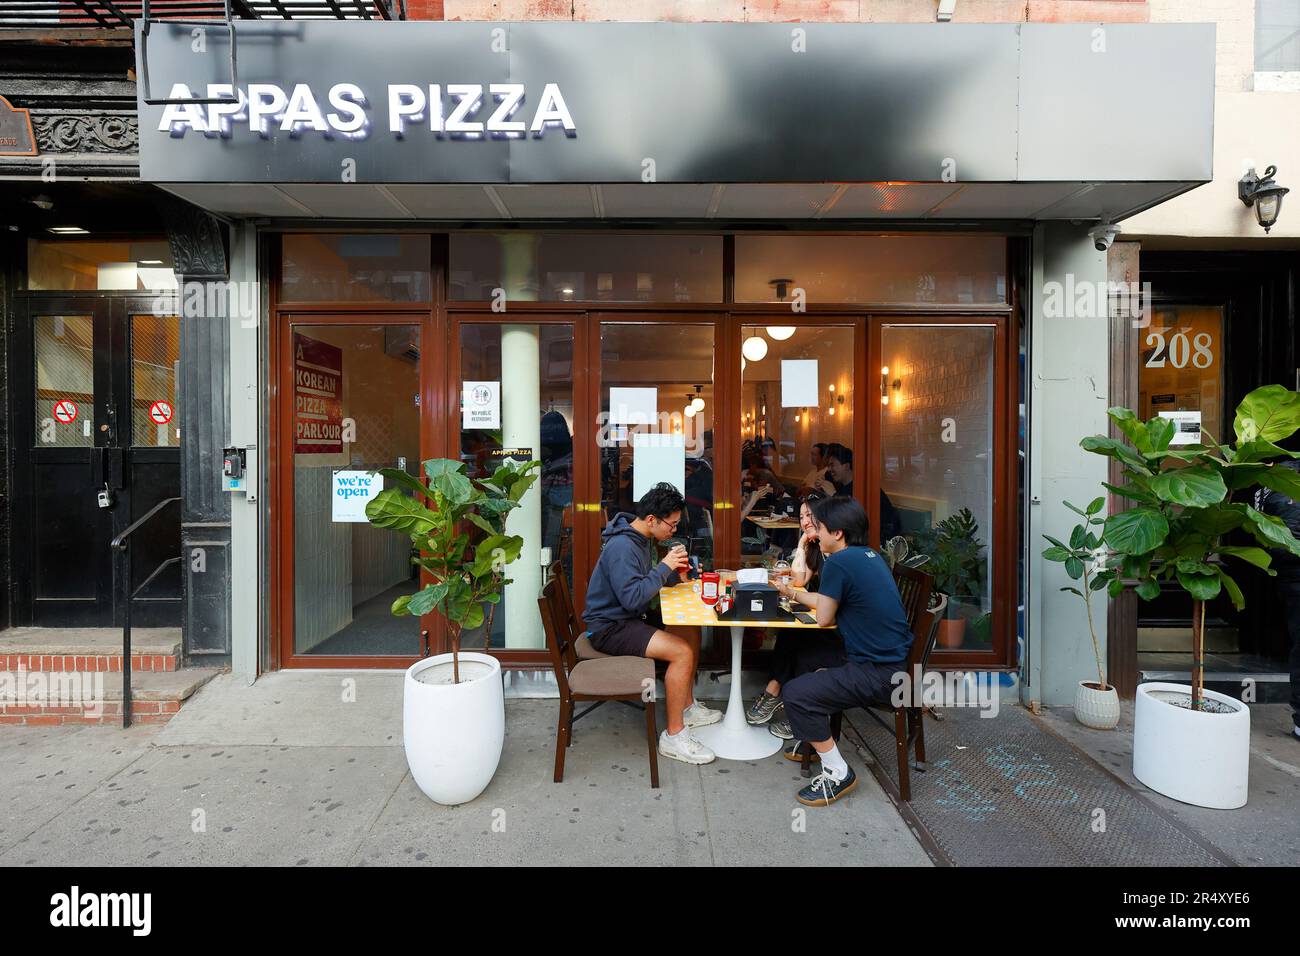 Appas Pizza, 210 1st Ave, New York, NYC storefront photo of a Korean pizza restaurant in Manhattan's East Village neighborhood. Stock Photo